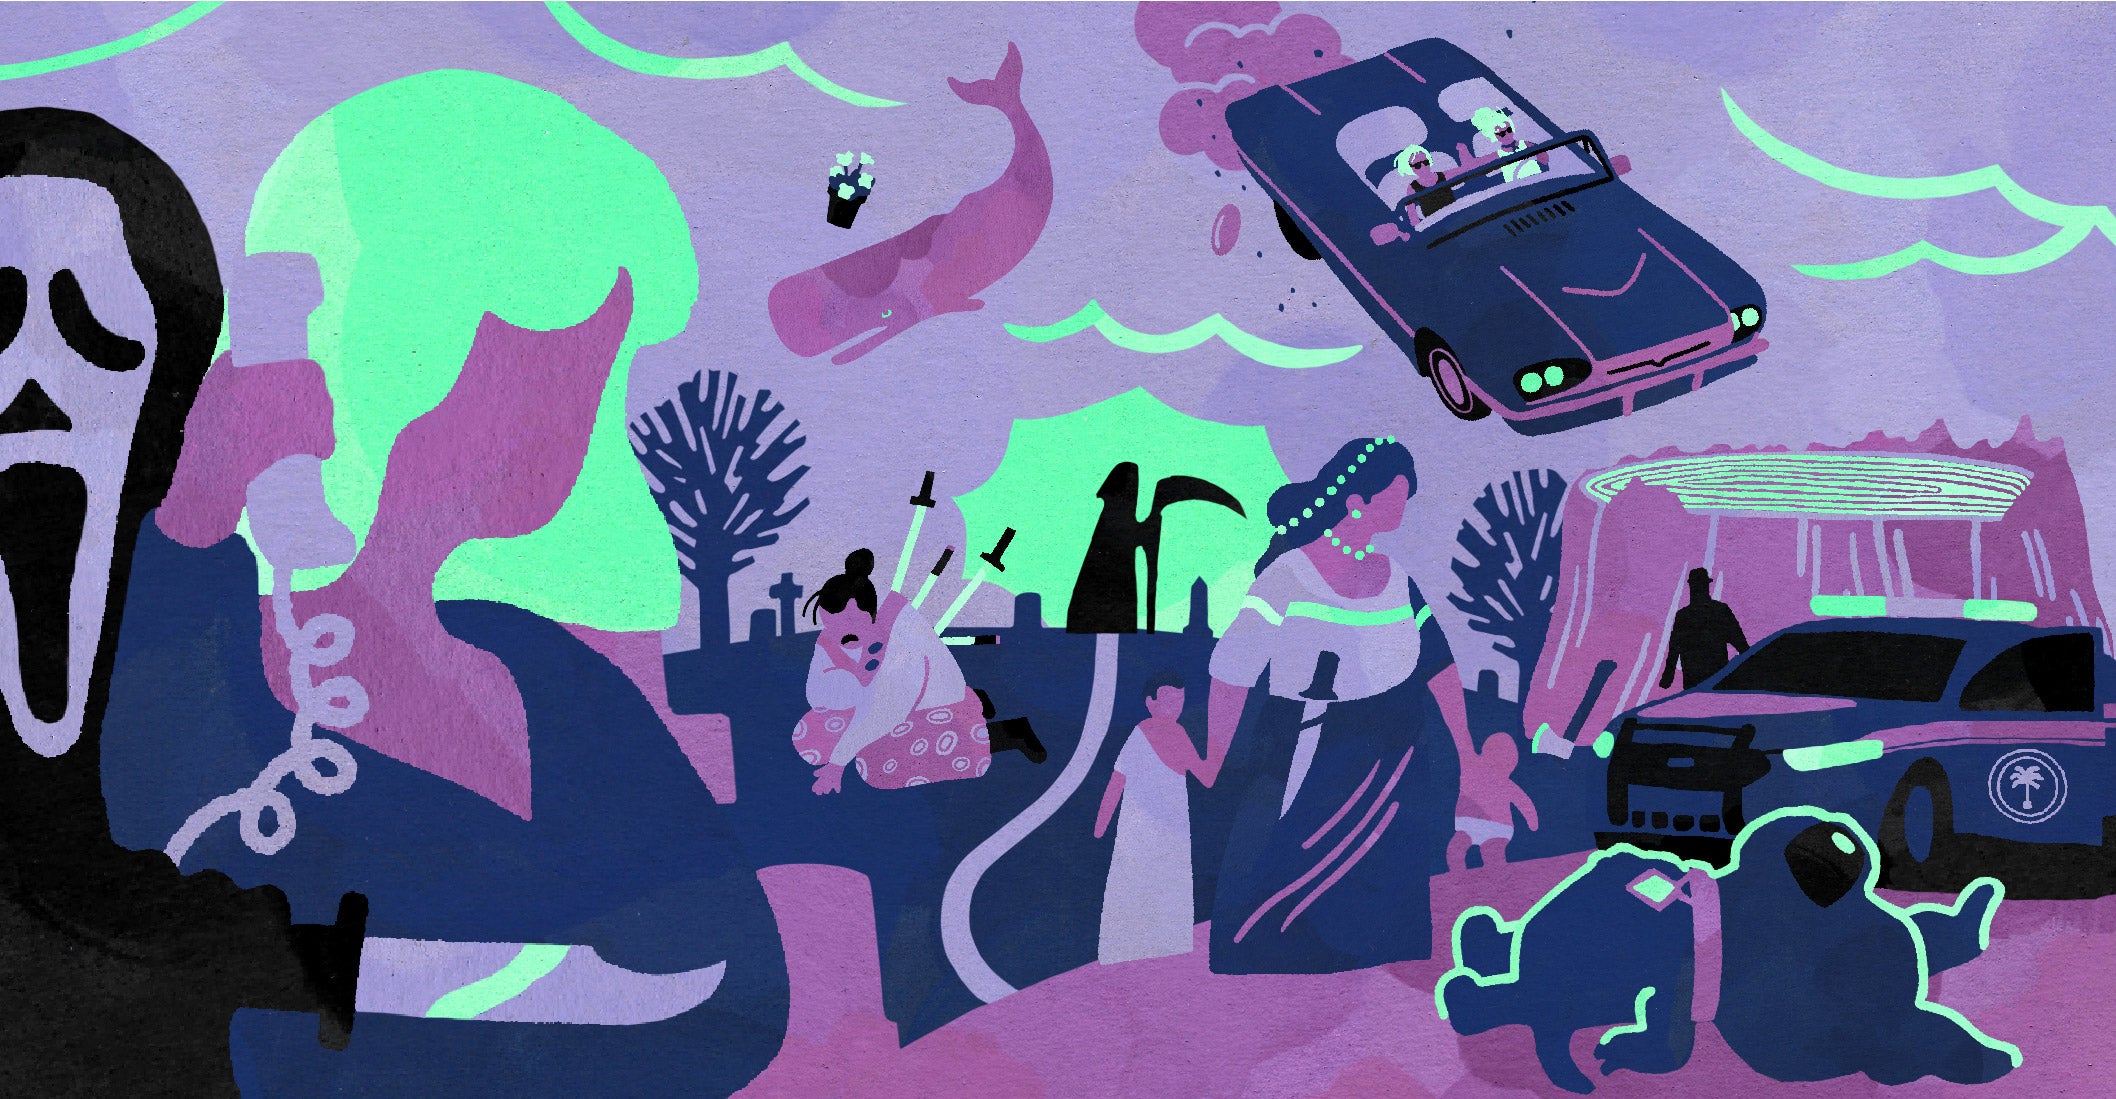 A scene showing various characters, including: Ghostface holding a corded phone and knife, a sperm whale with a flowerpot over its head, the stabbed samurai from Rashomon, the Grim Reaper, Thelma and Louise dropping down in a car, Scrappy Doo lying on the ground, and a police car